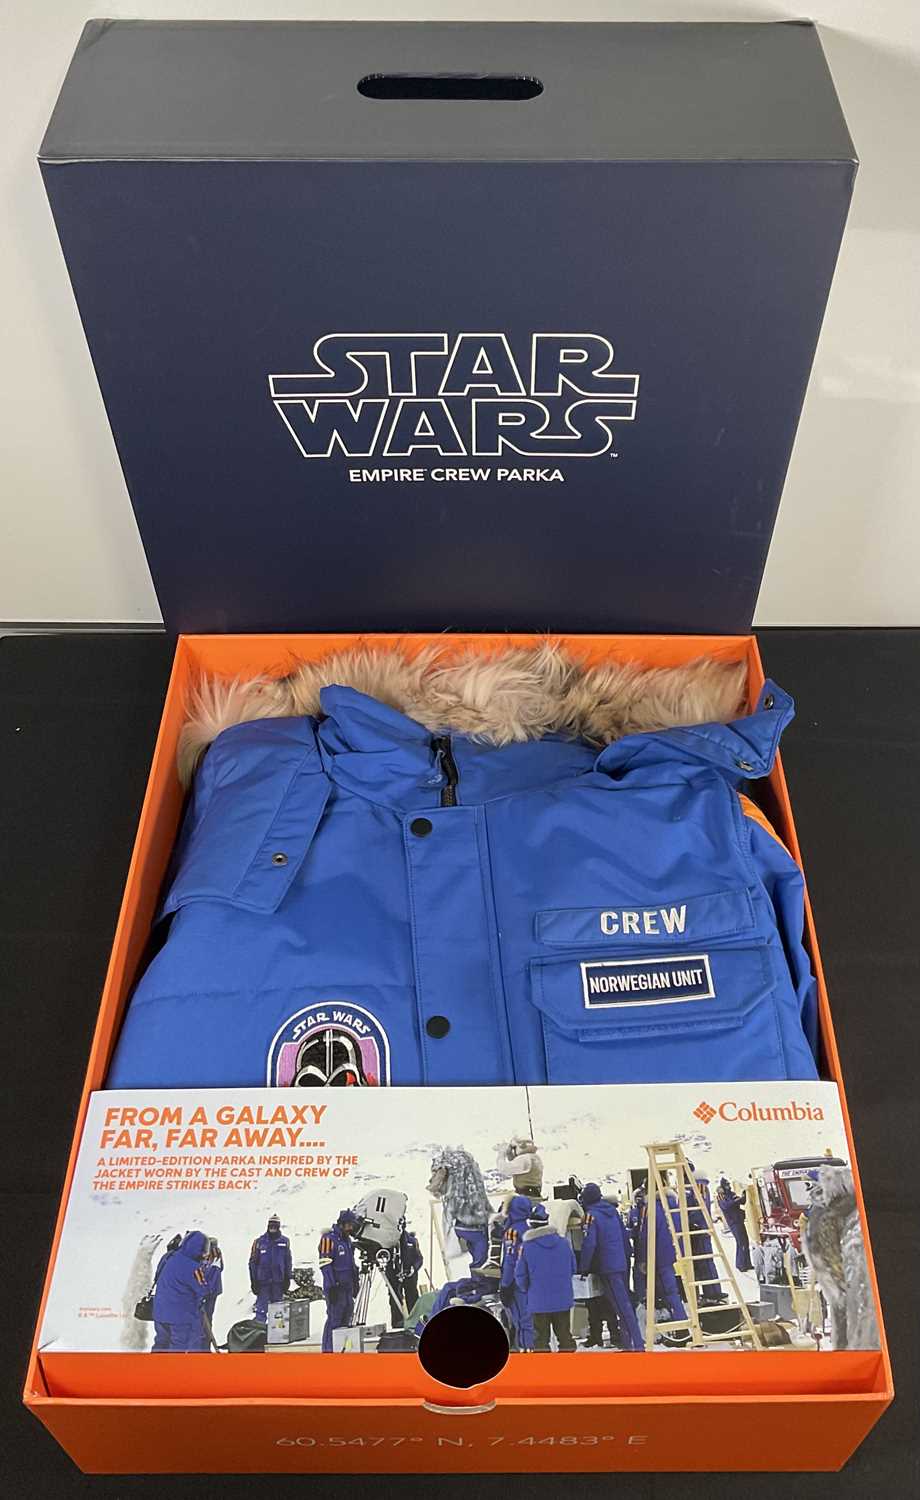 STAR WARS - A Star Wars Episode V: Empire Strikes back crew parka jacket made by Columbia as a